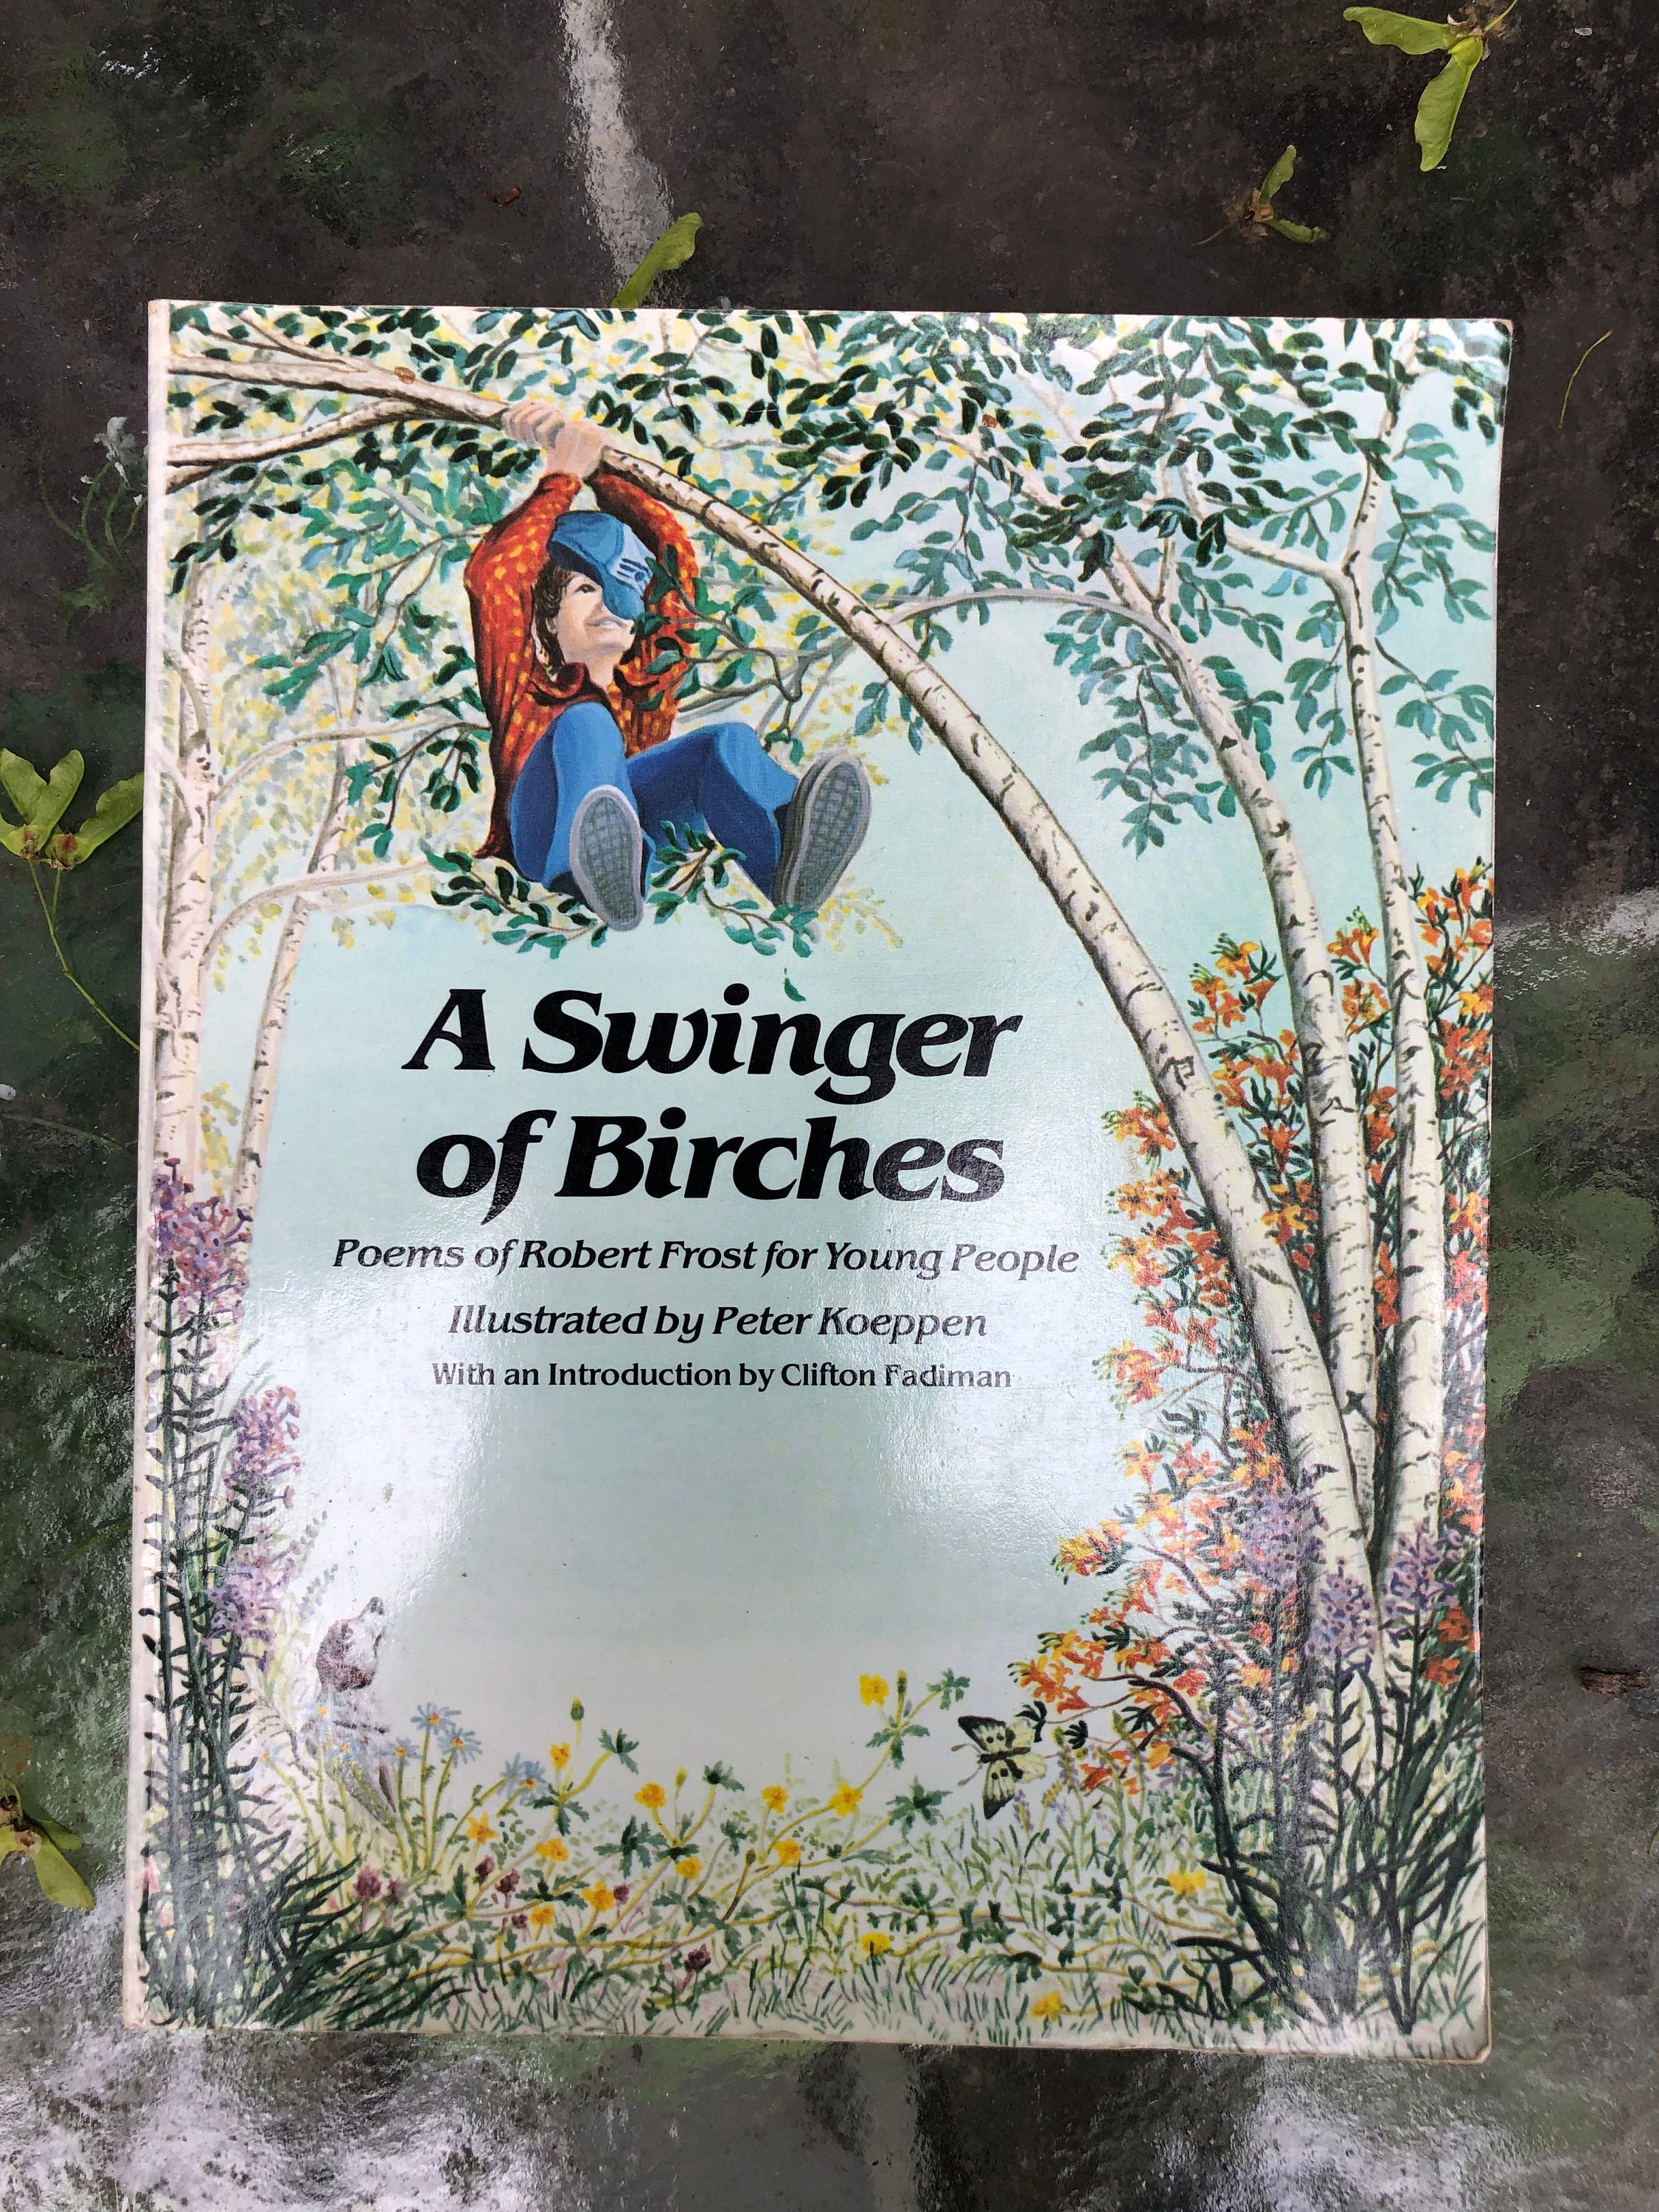 A Swinger of Birches Poems by Robert Frost for Young People